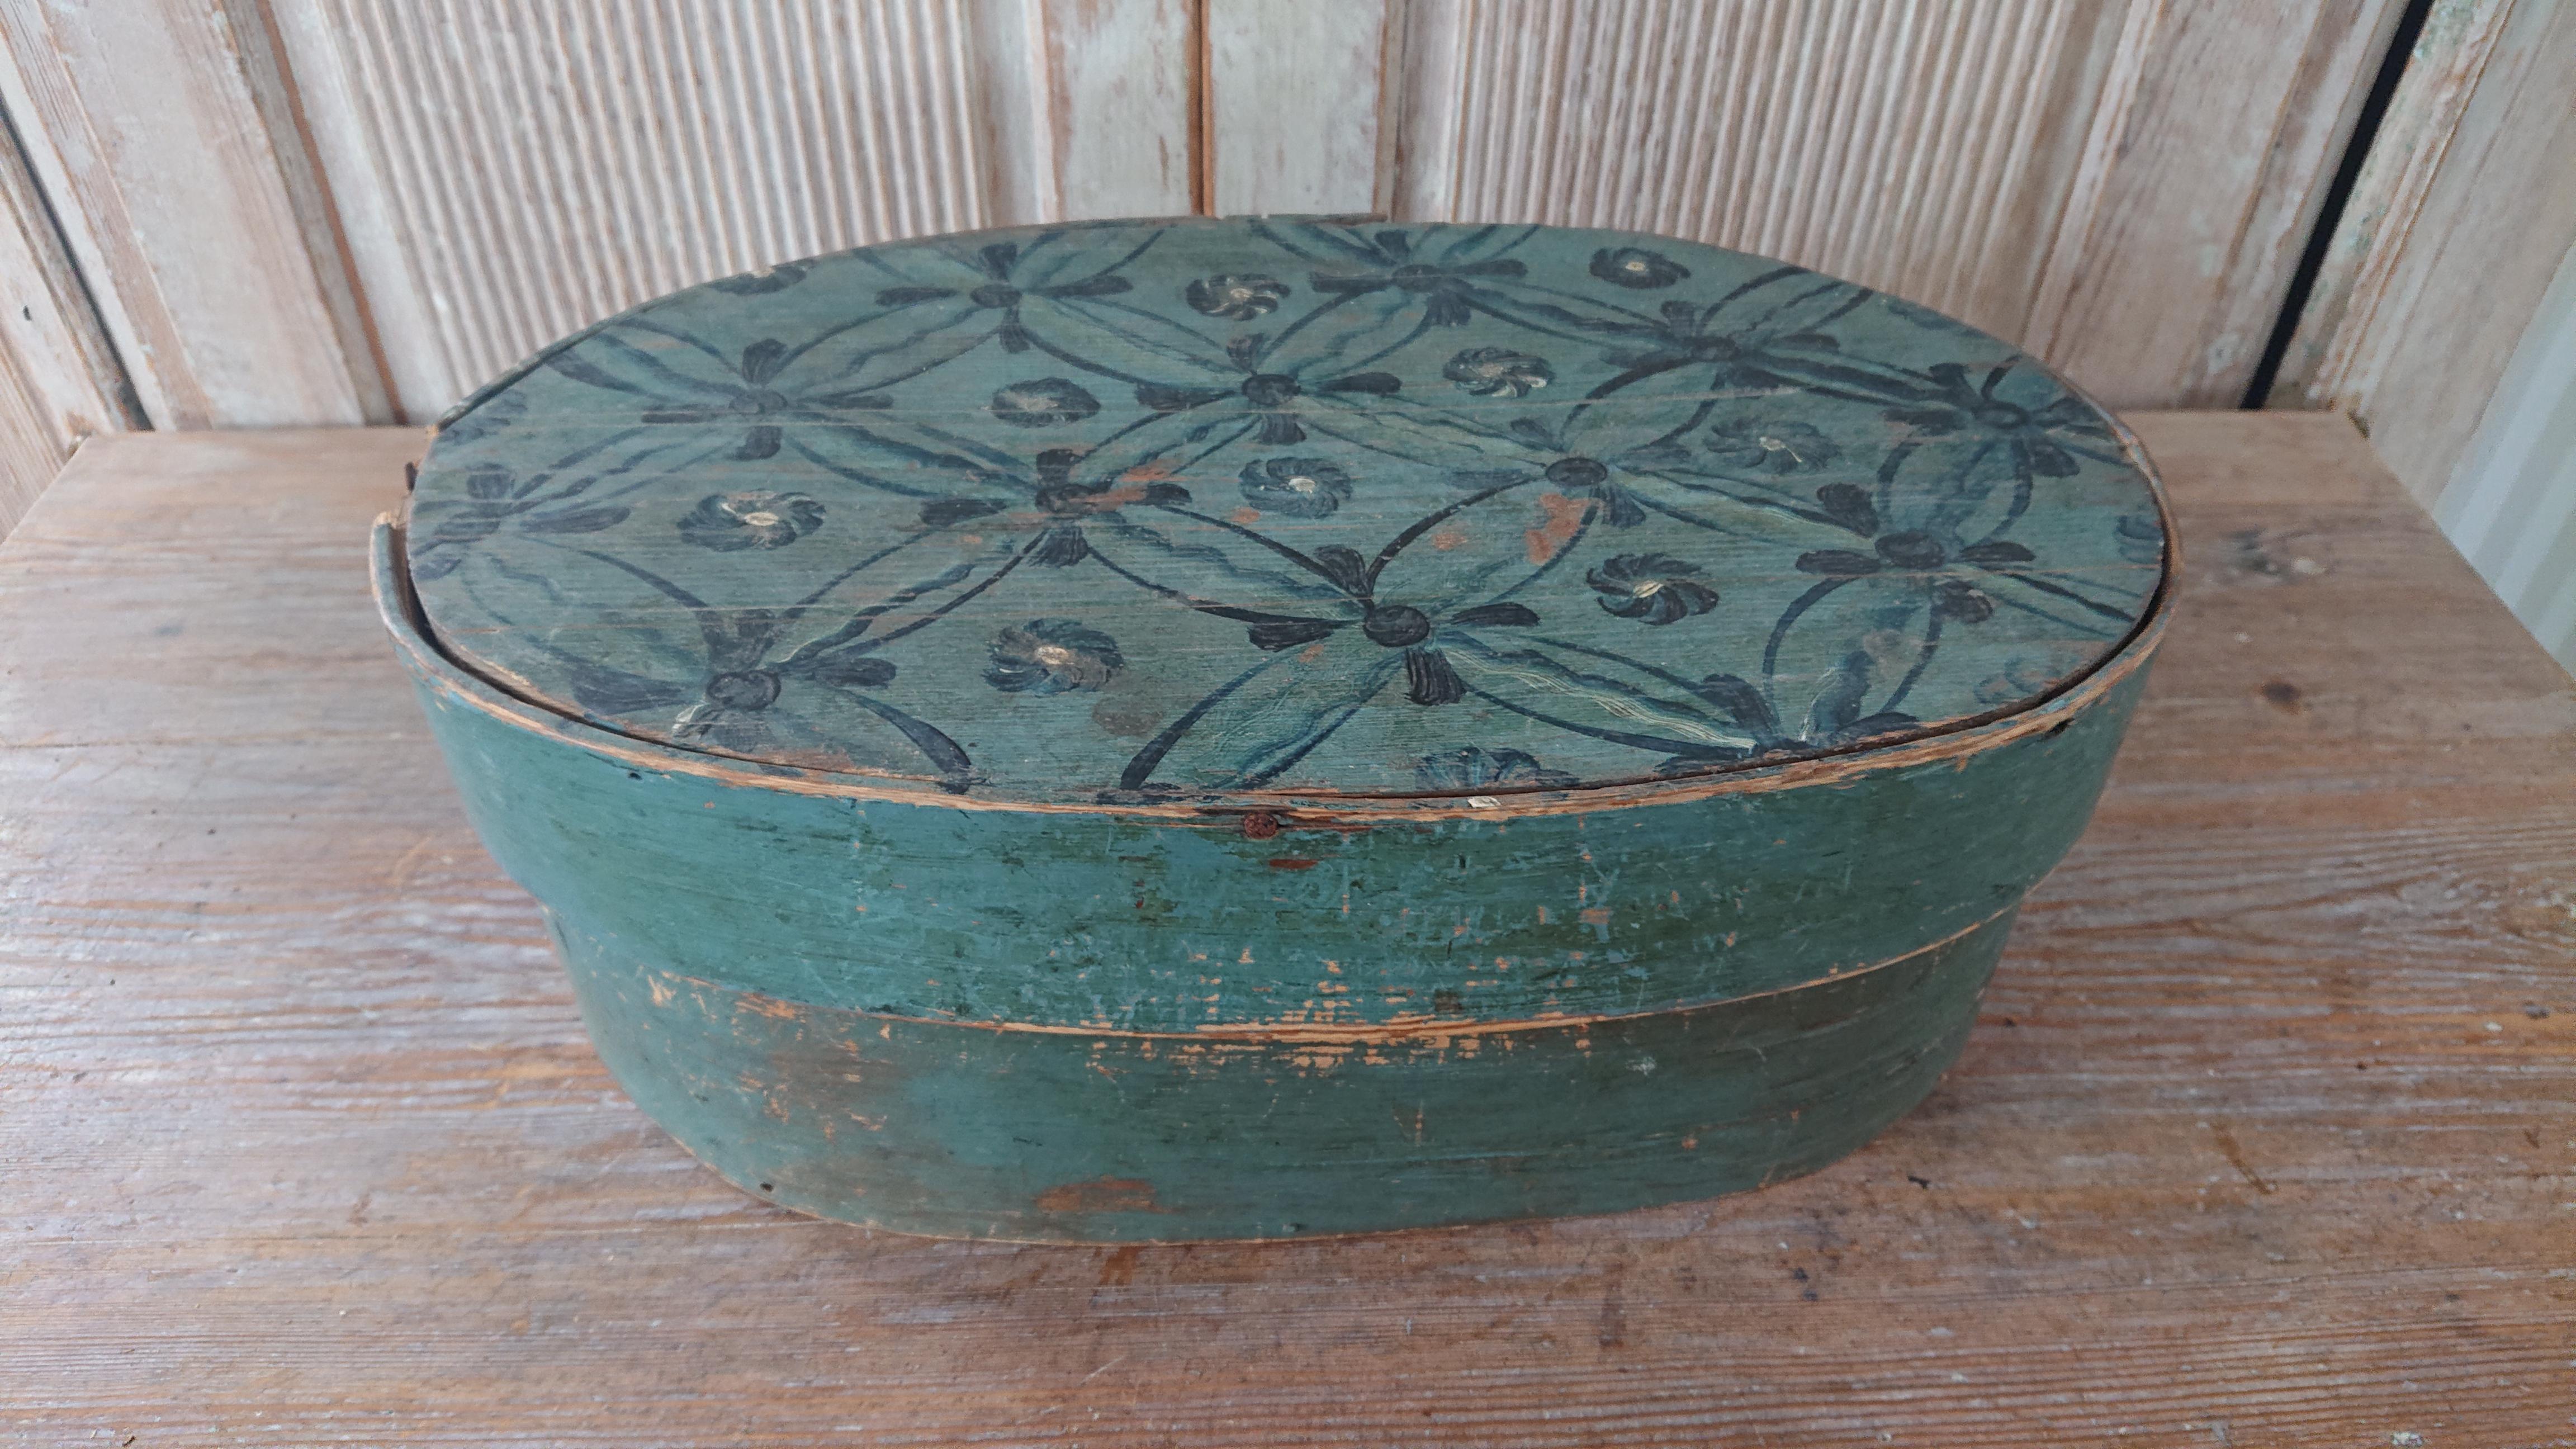 19th Century Swedish Folk Art Bentwood Box from Hälsingland, Northern Sweden.
Oval box with lid.
Originalpainted with nice patina after several hundred years of use.
Beautifully painted flowers on the lid.
Small wood damage occur.
Valuables